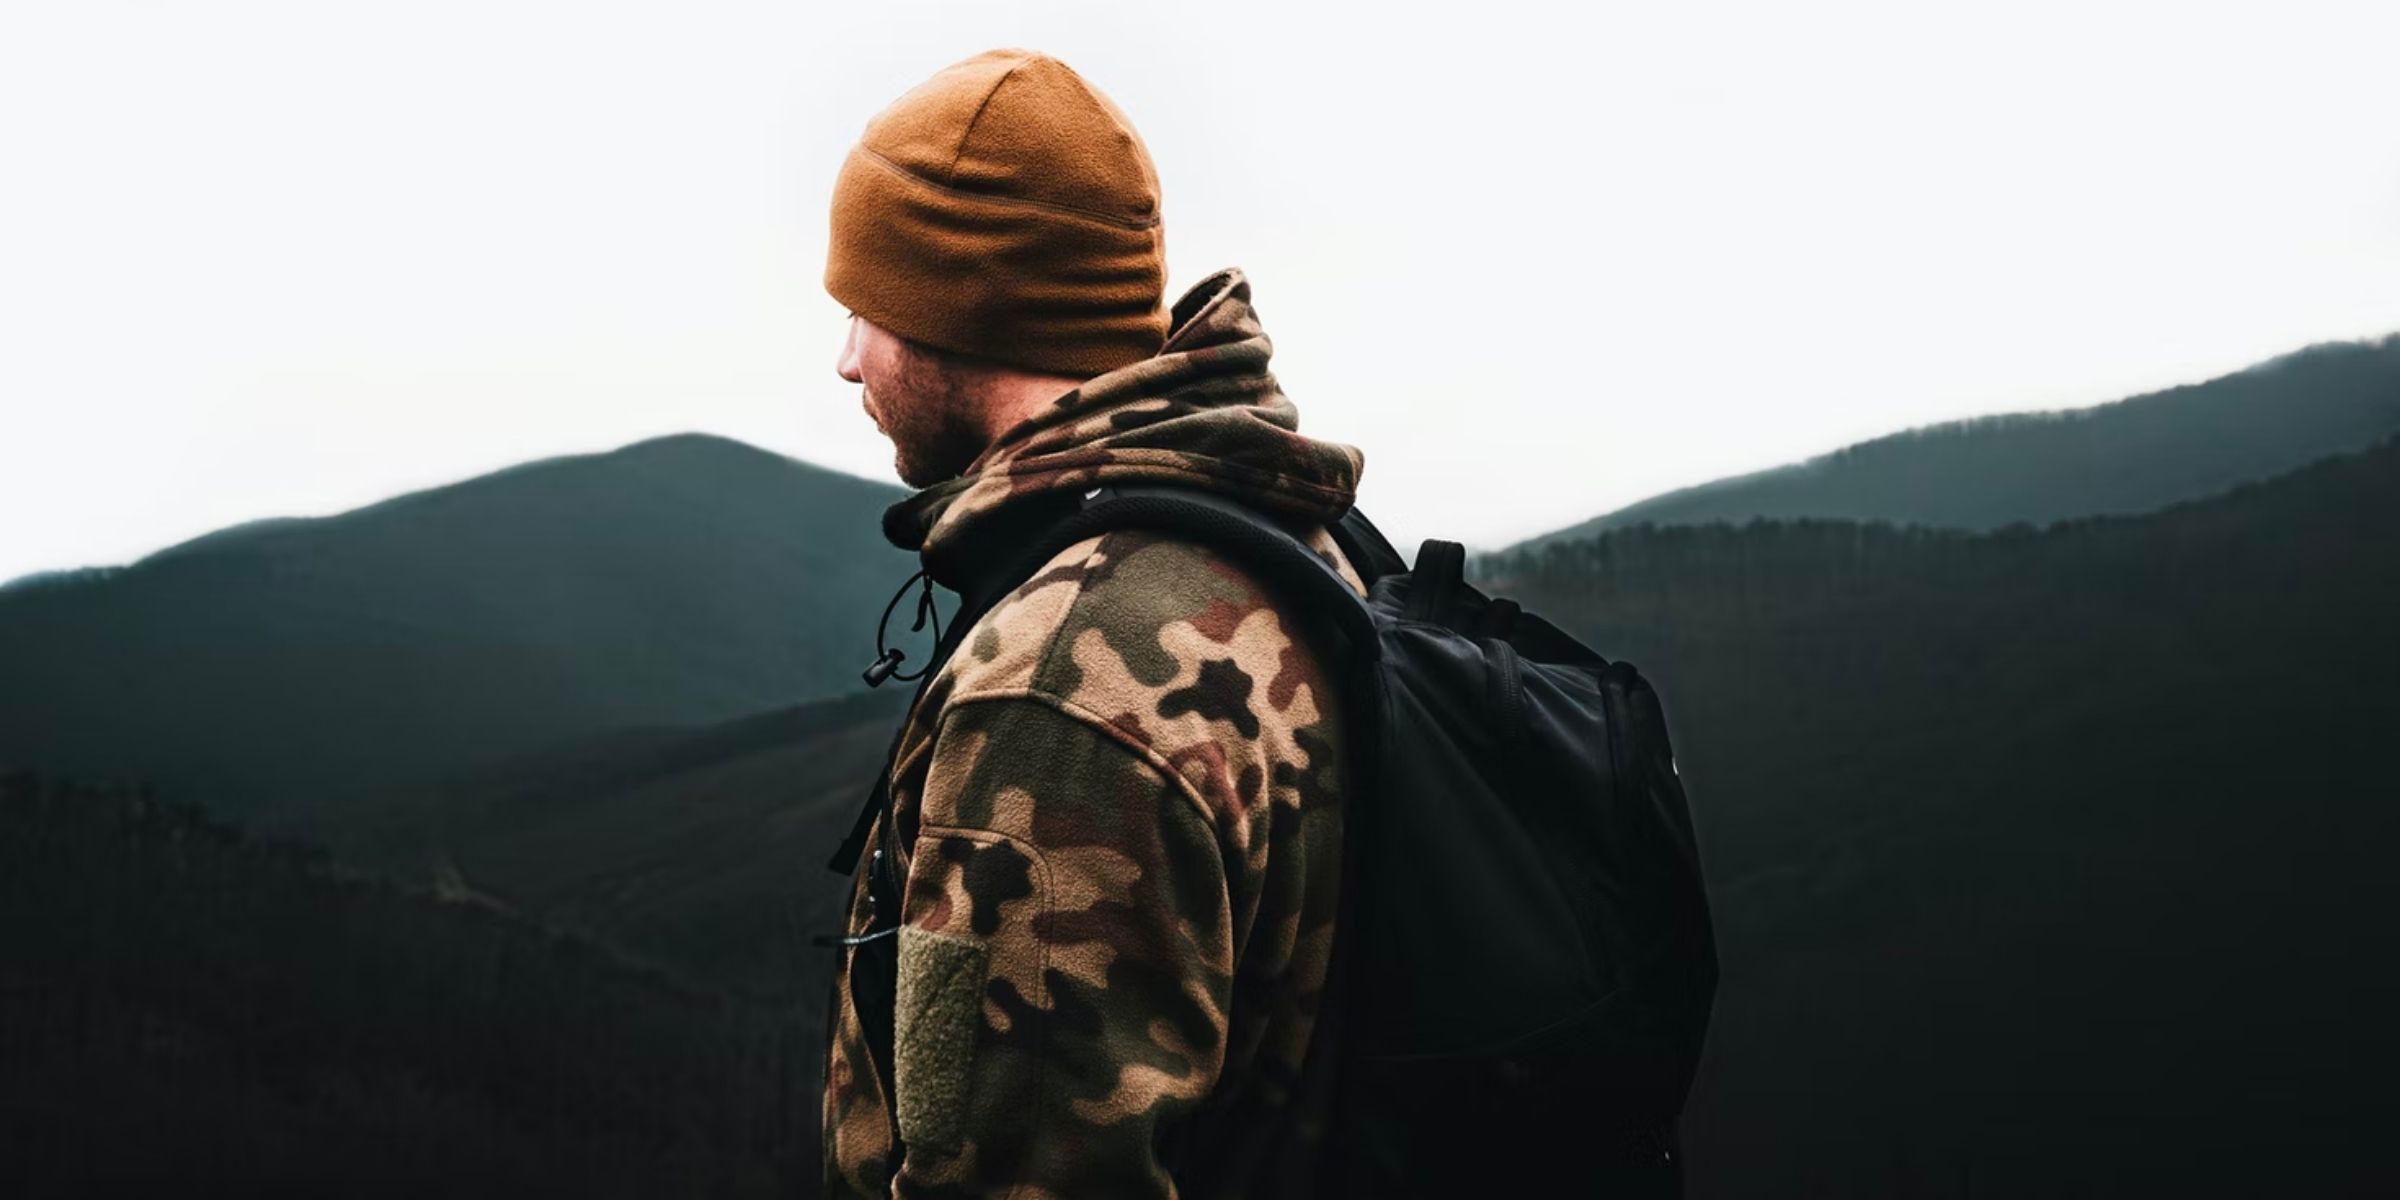 a person wearing a camouflage jacket standing on a mountain